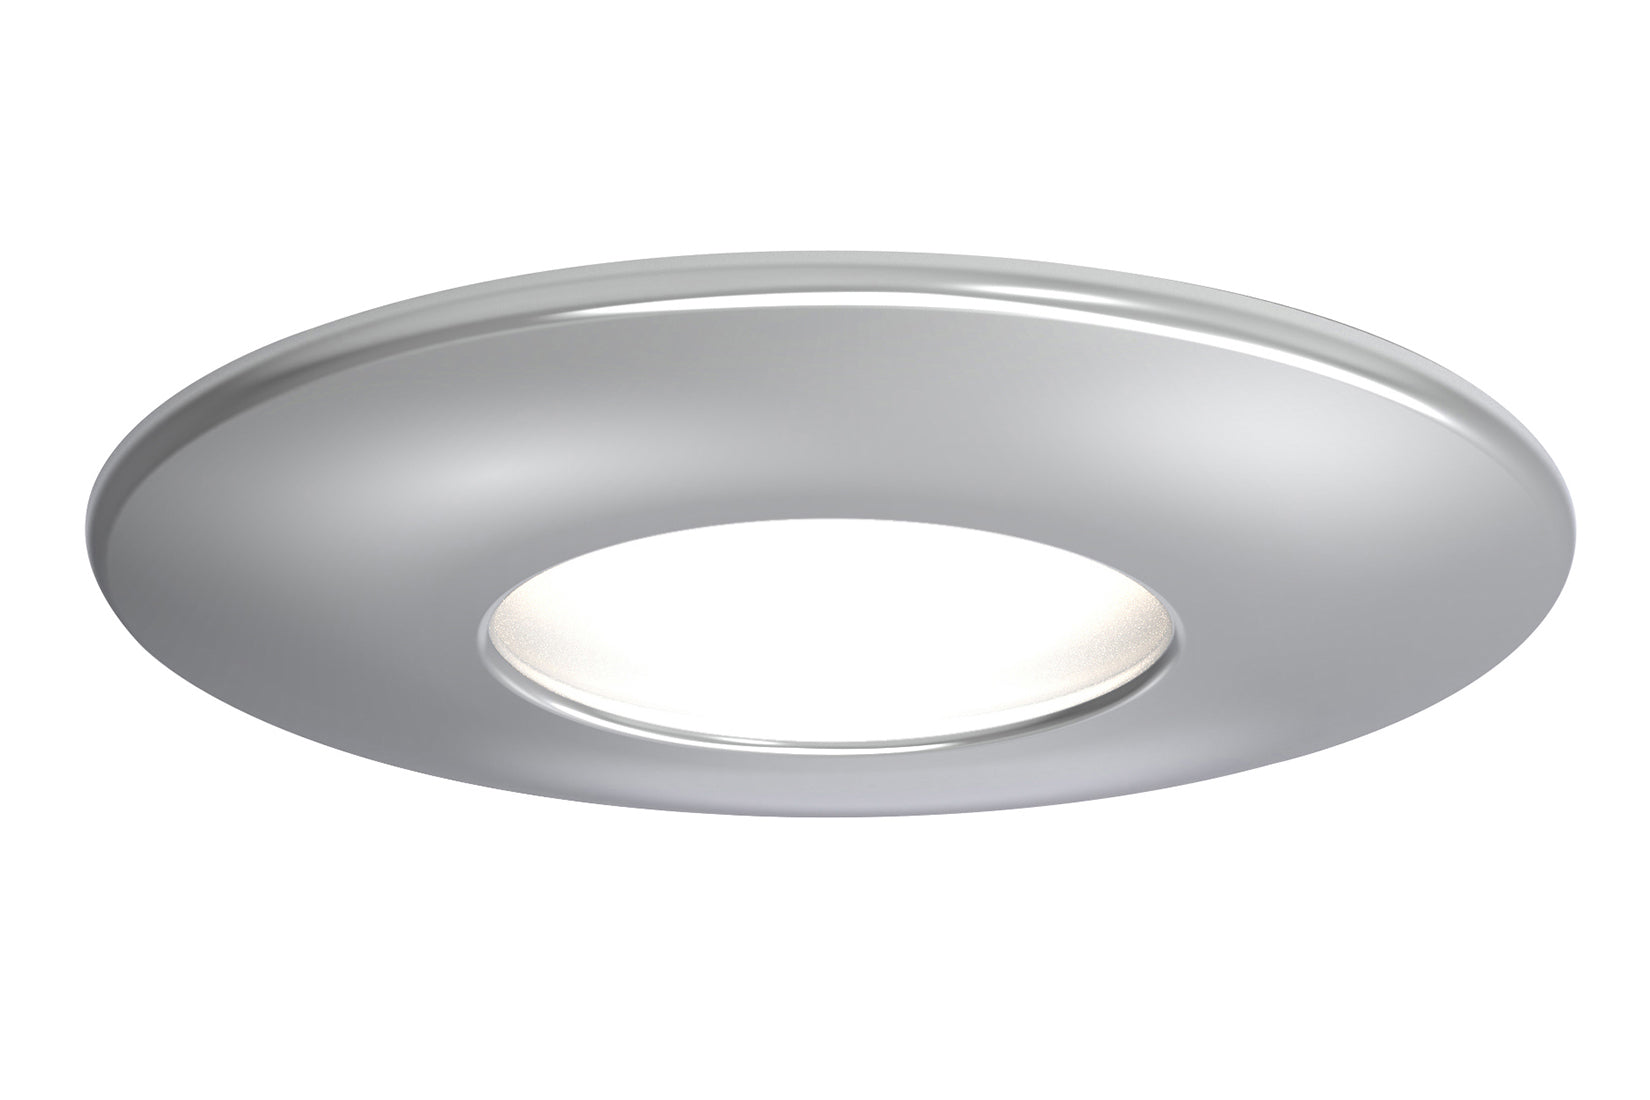 4lite WiZ Connected Fire-Rated IP65 GU10 Smart LED Downlight - Chrome (Single)